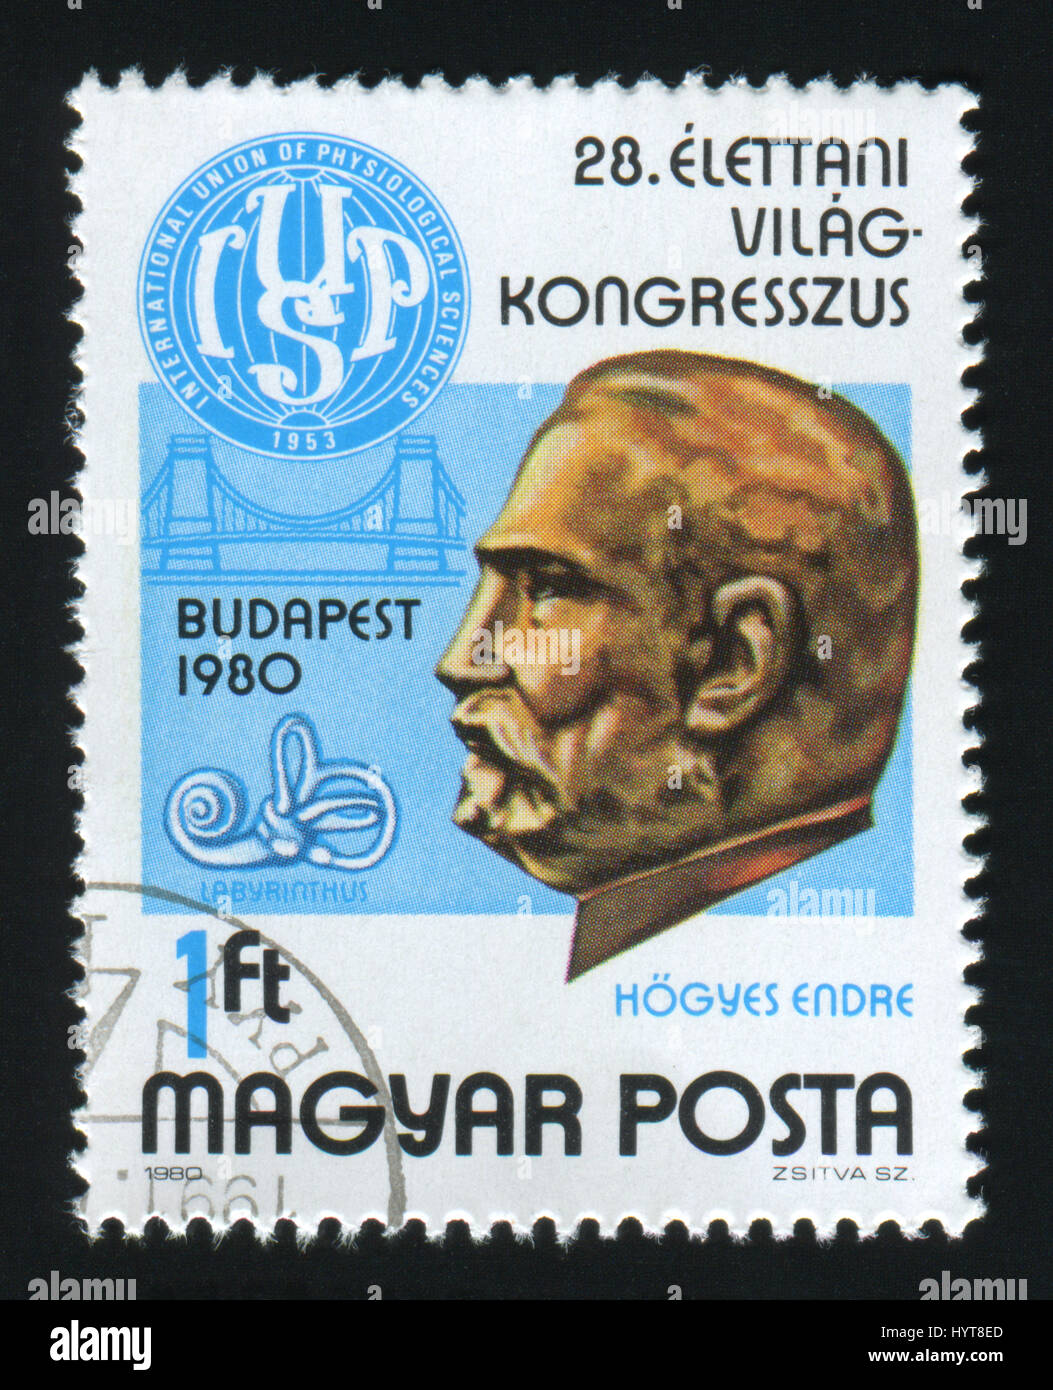 HUNGARY - CIRCA 1980: A post stamp printed in Hungary, i shows Endre Hogyes and Congress Emblem, circa 1980. Stock Photo